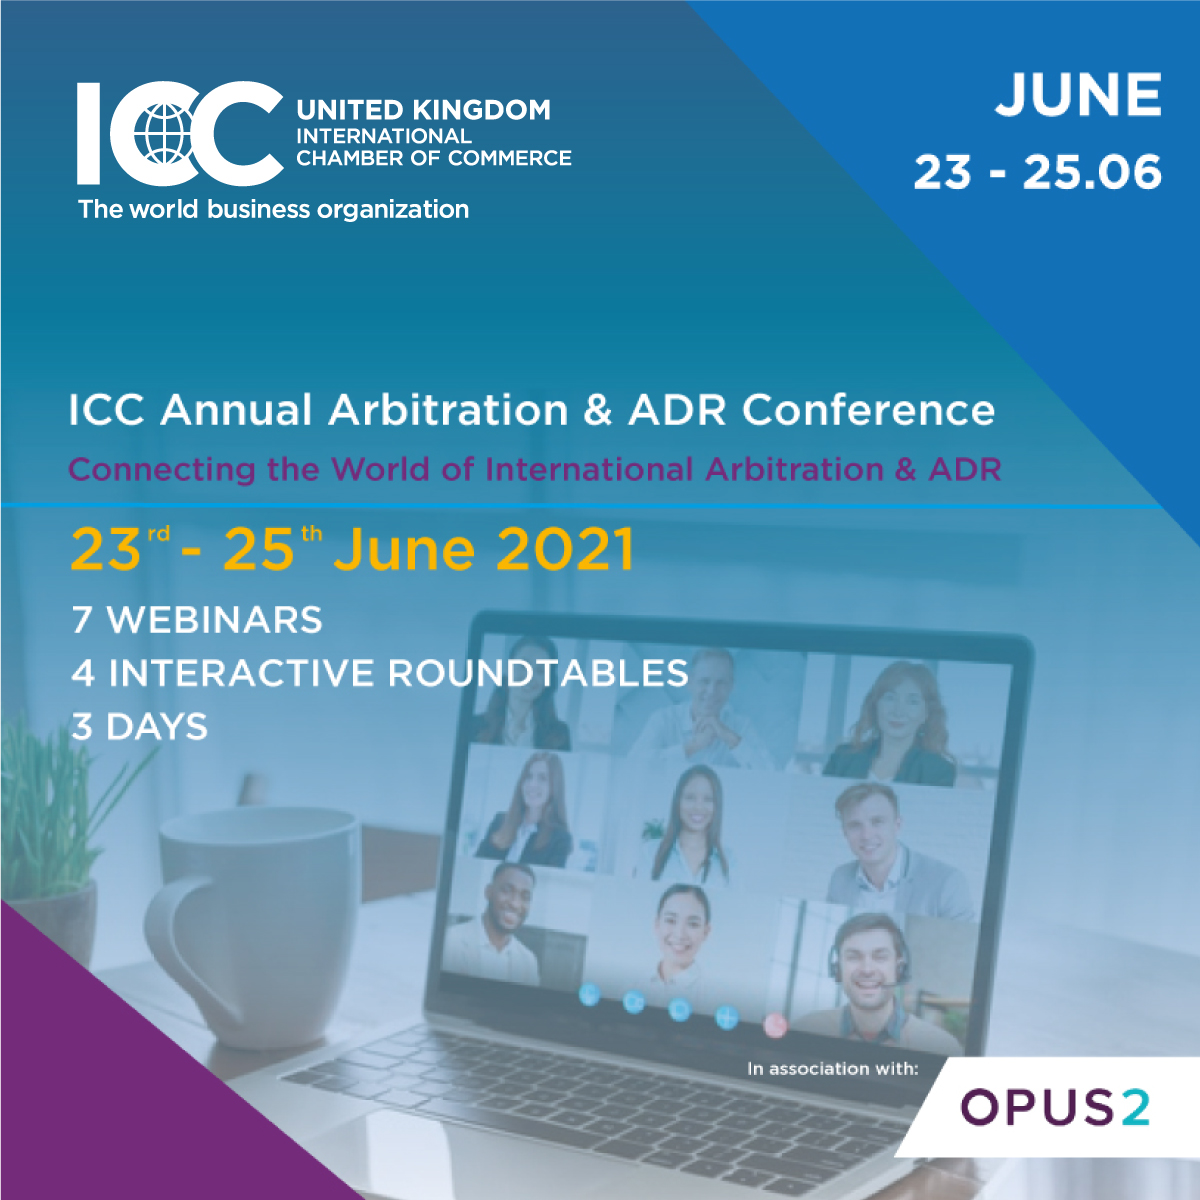 The ICC Annual Arbitration & ADR Conference in association with Opus 2